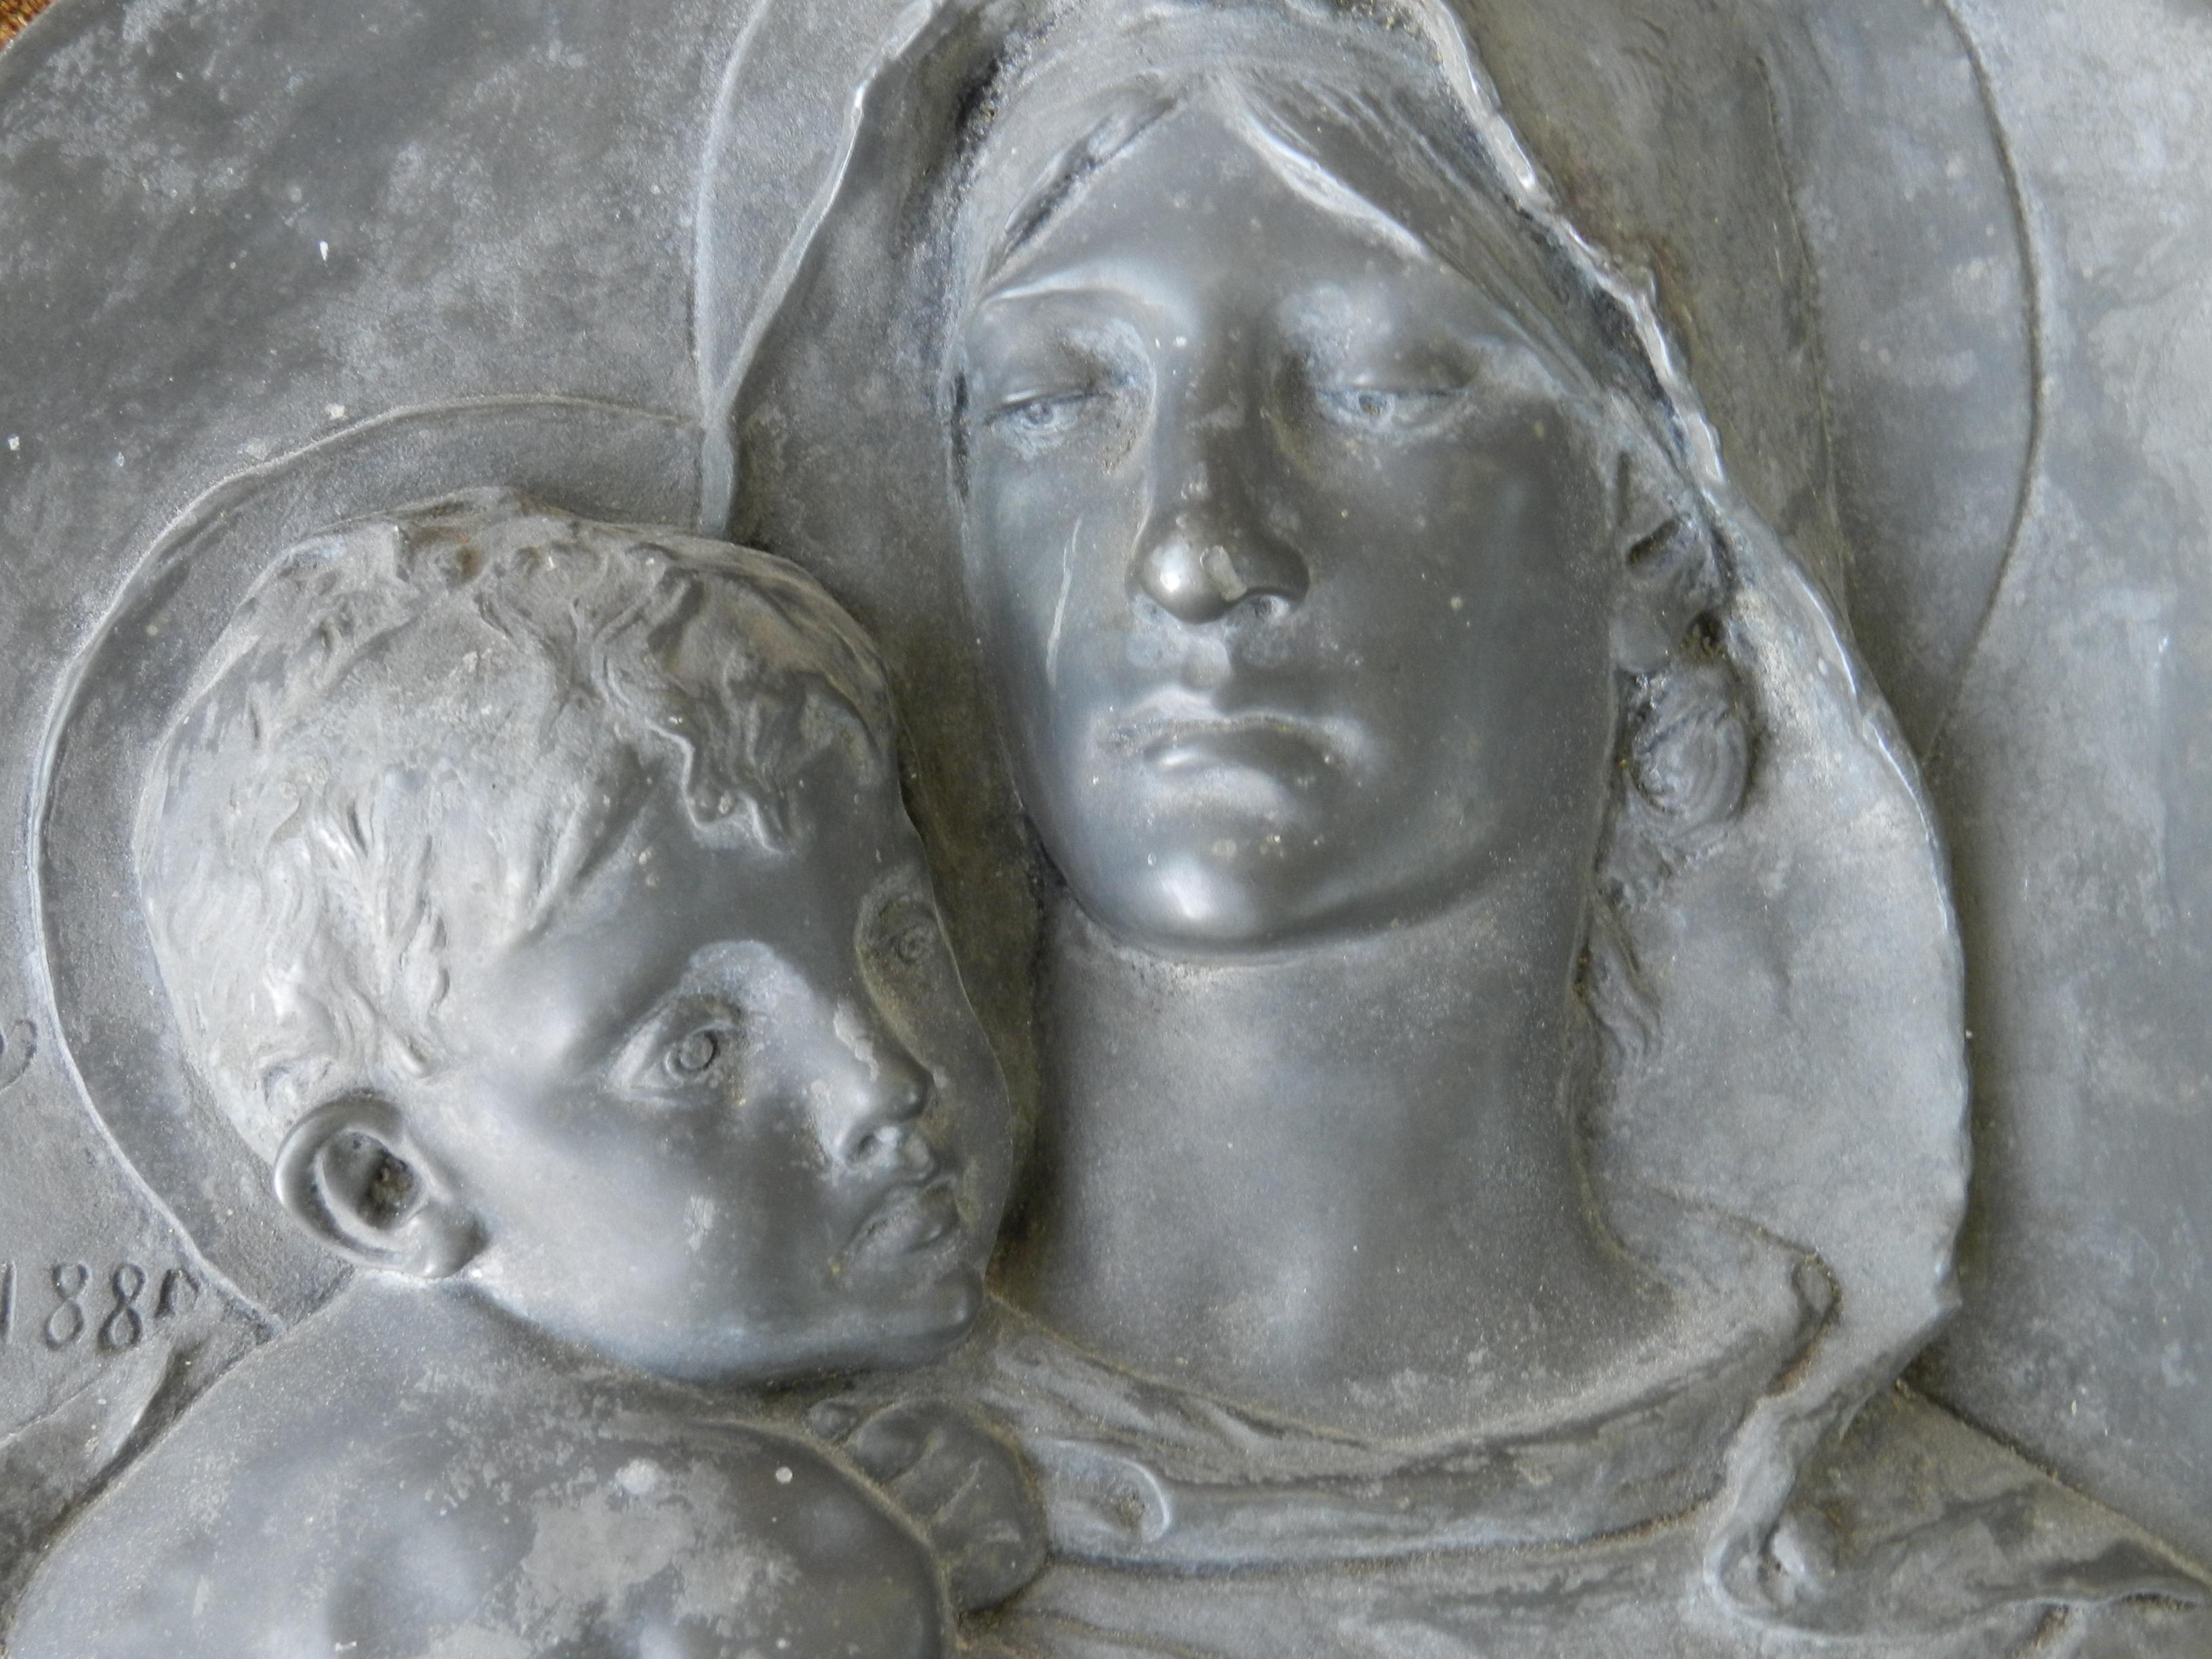 Madonna and Child 19th Century Pewter Sculpture after A Lanson c1881 Mary Jesus  - Brown Figurative Sculpture by ALFRED DESIRE LANSON